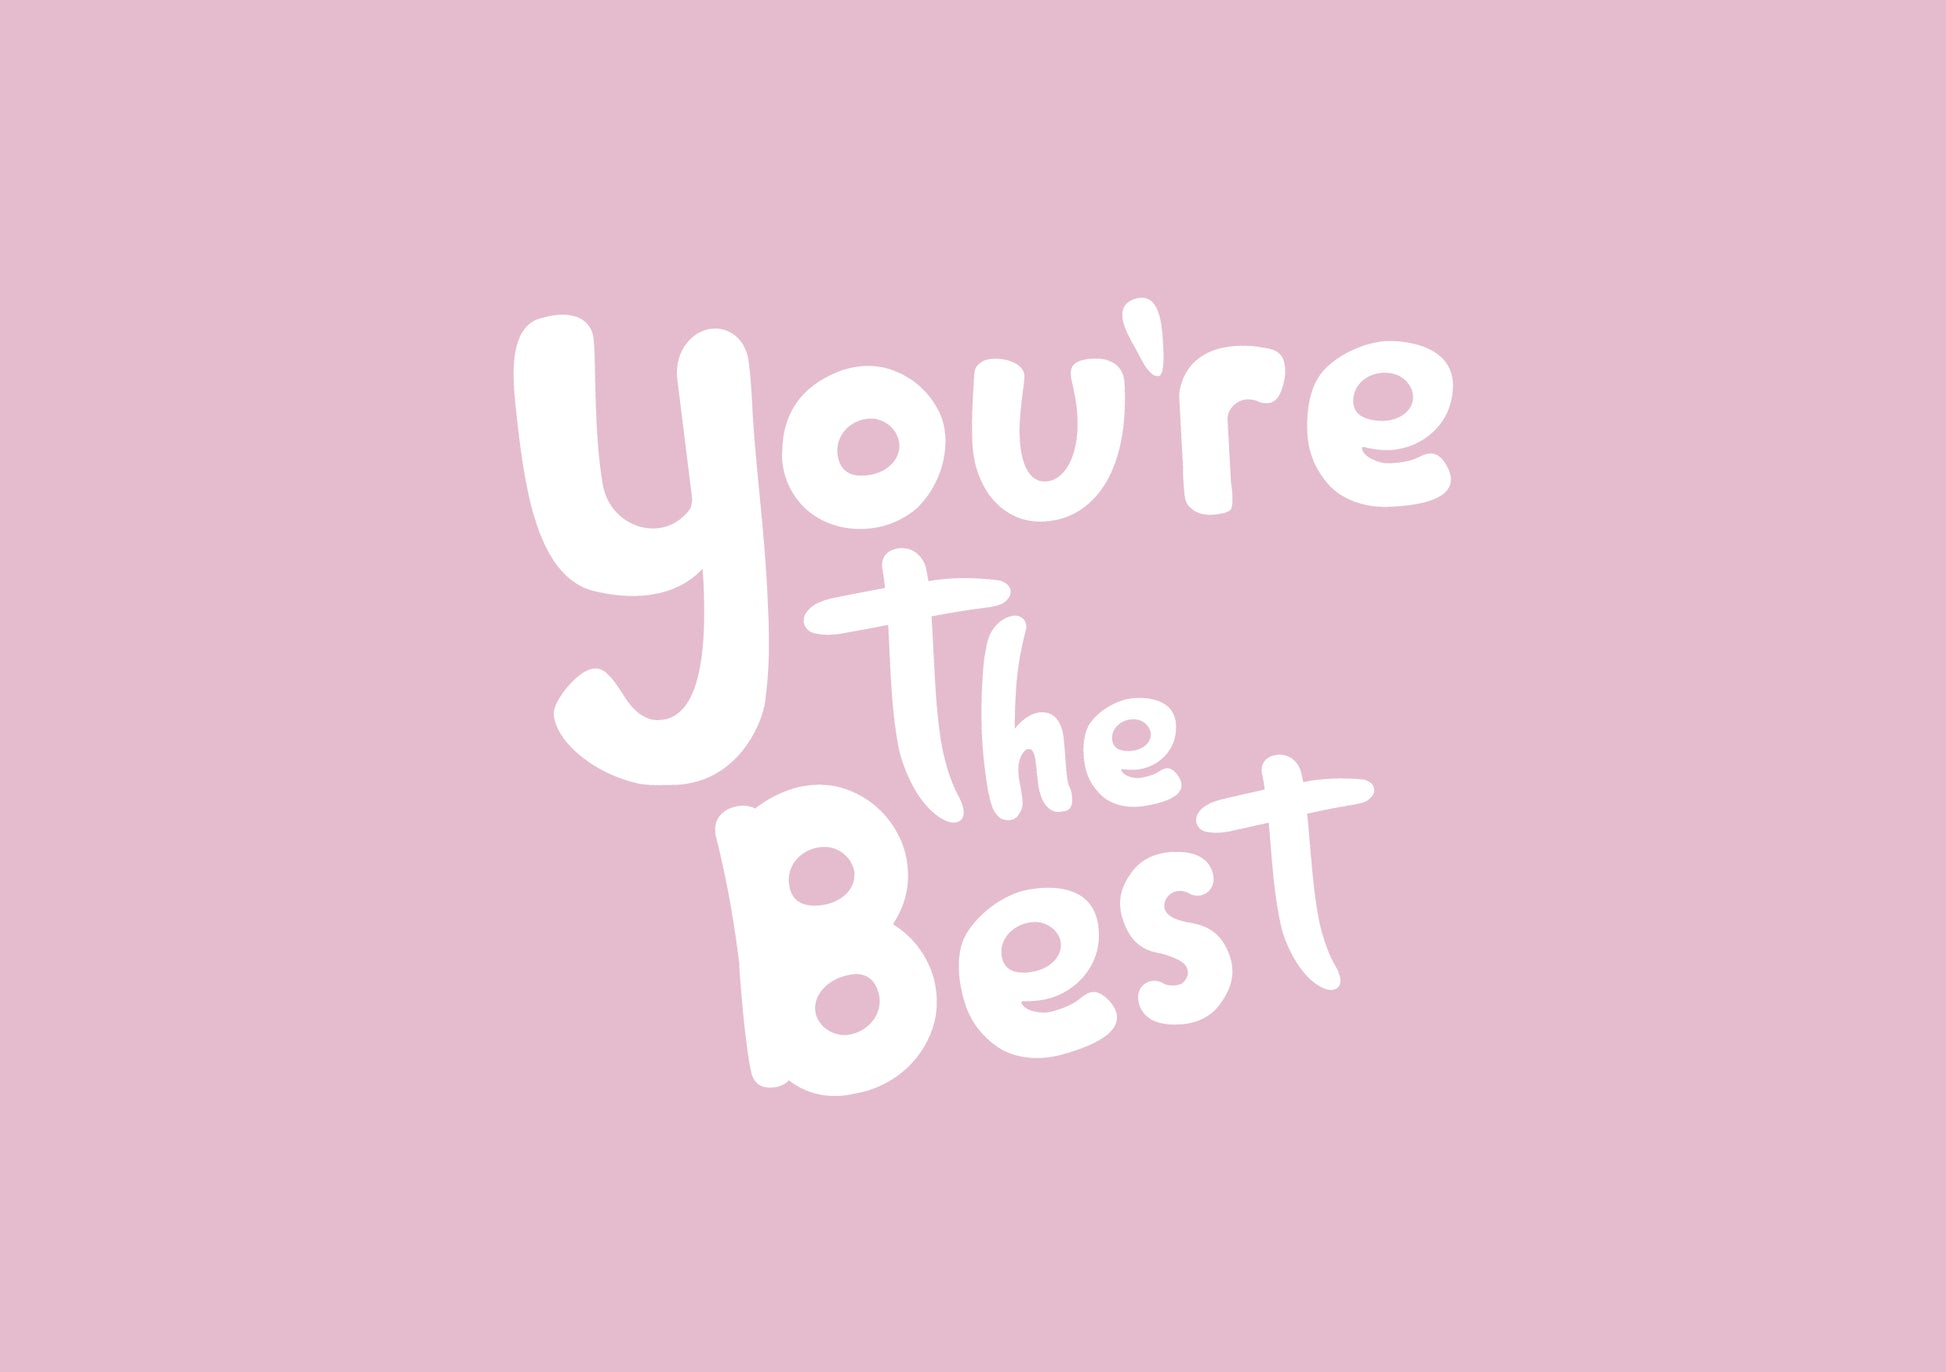 You're the best greeting card